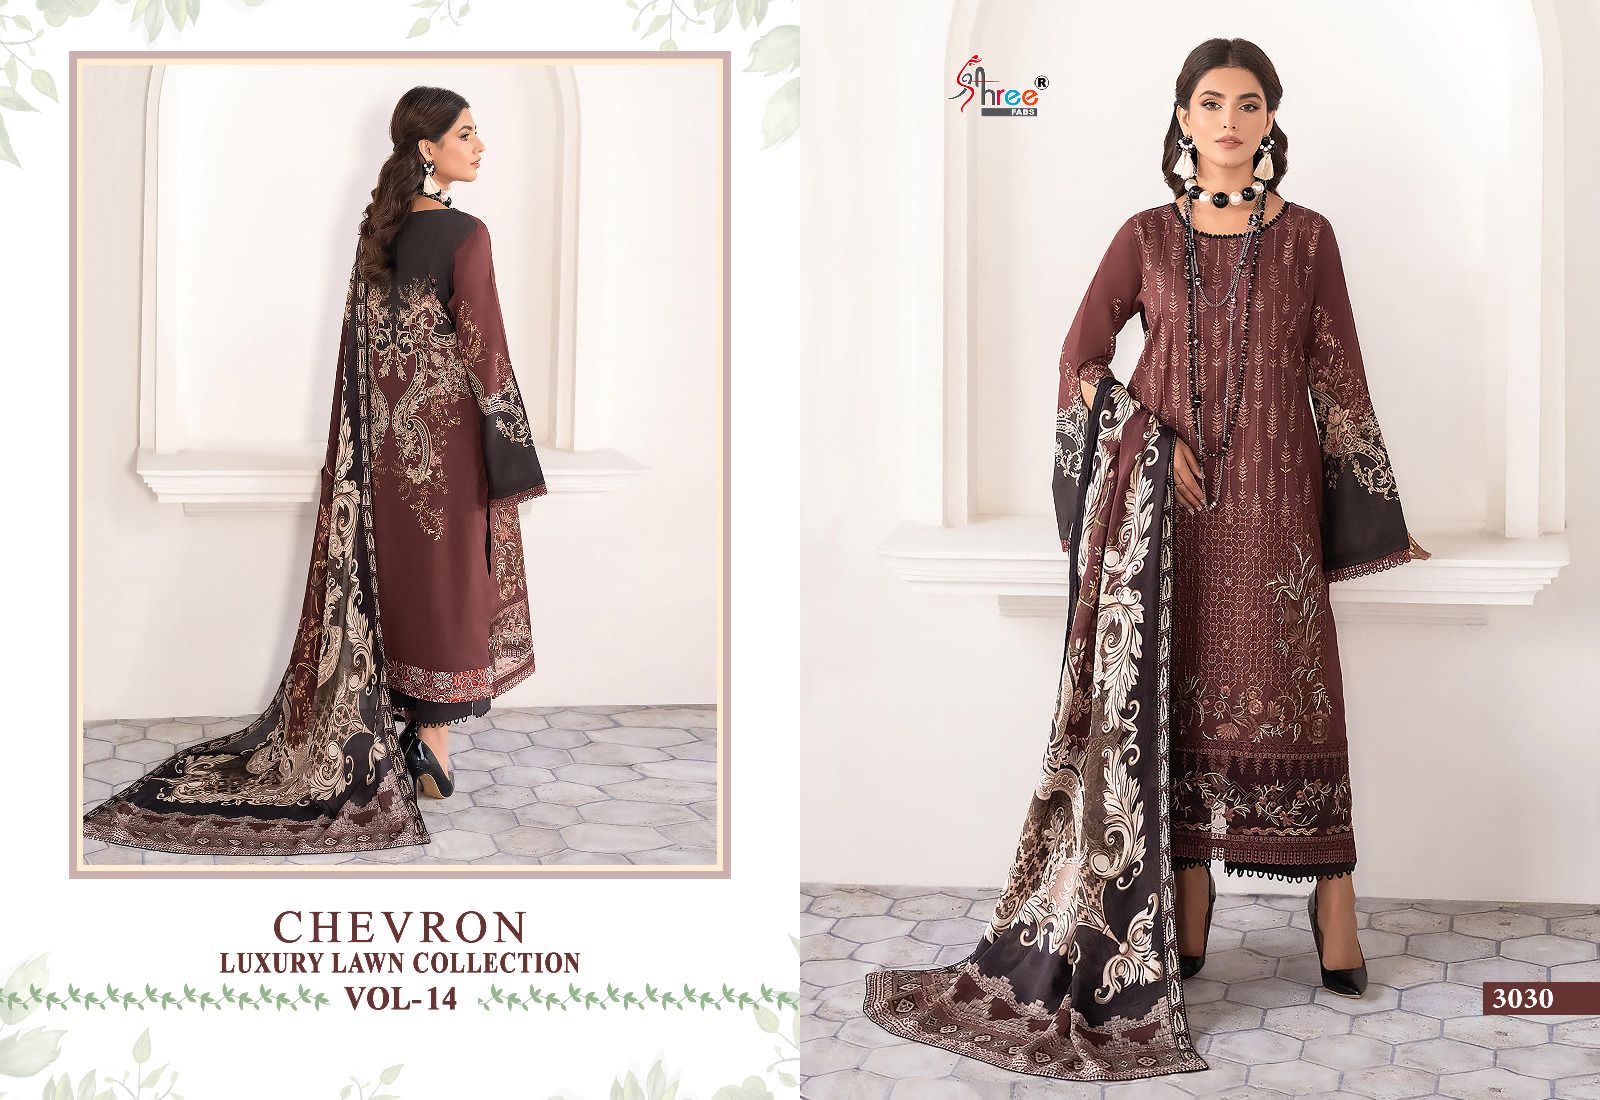 Shree Chevron Luxury Lawn Collection Vol 14 collection 9